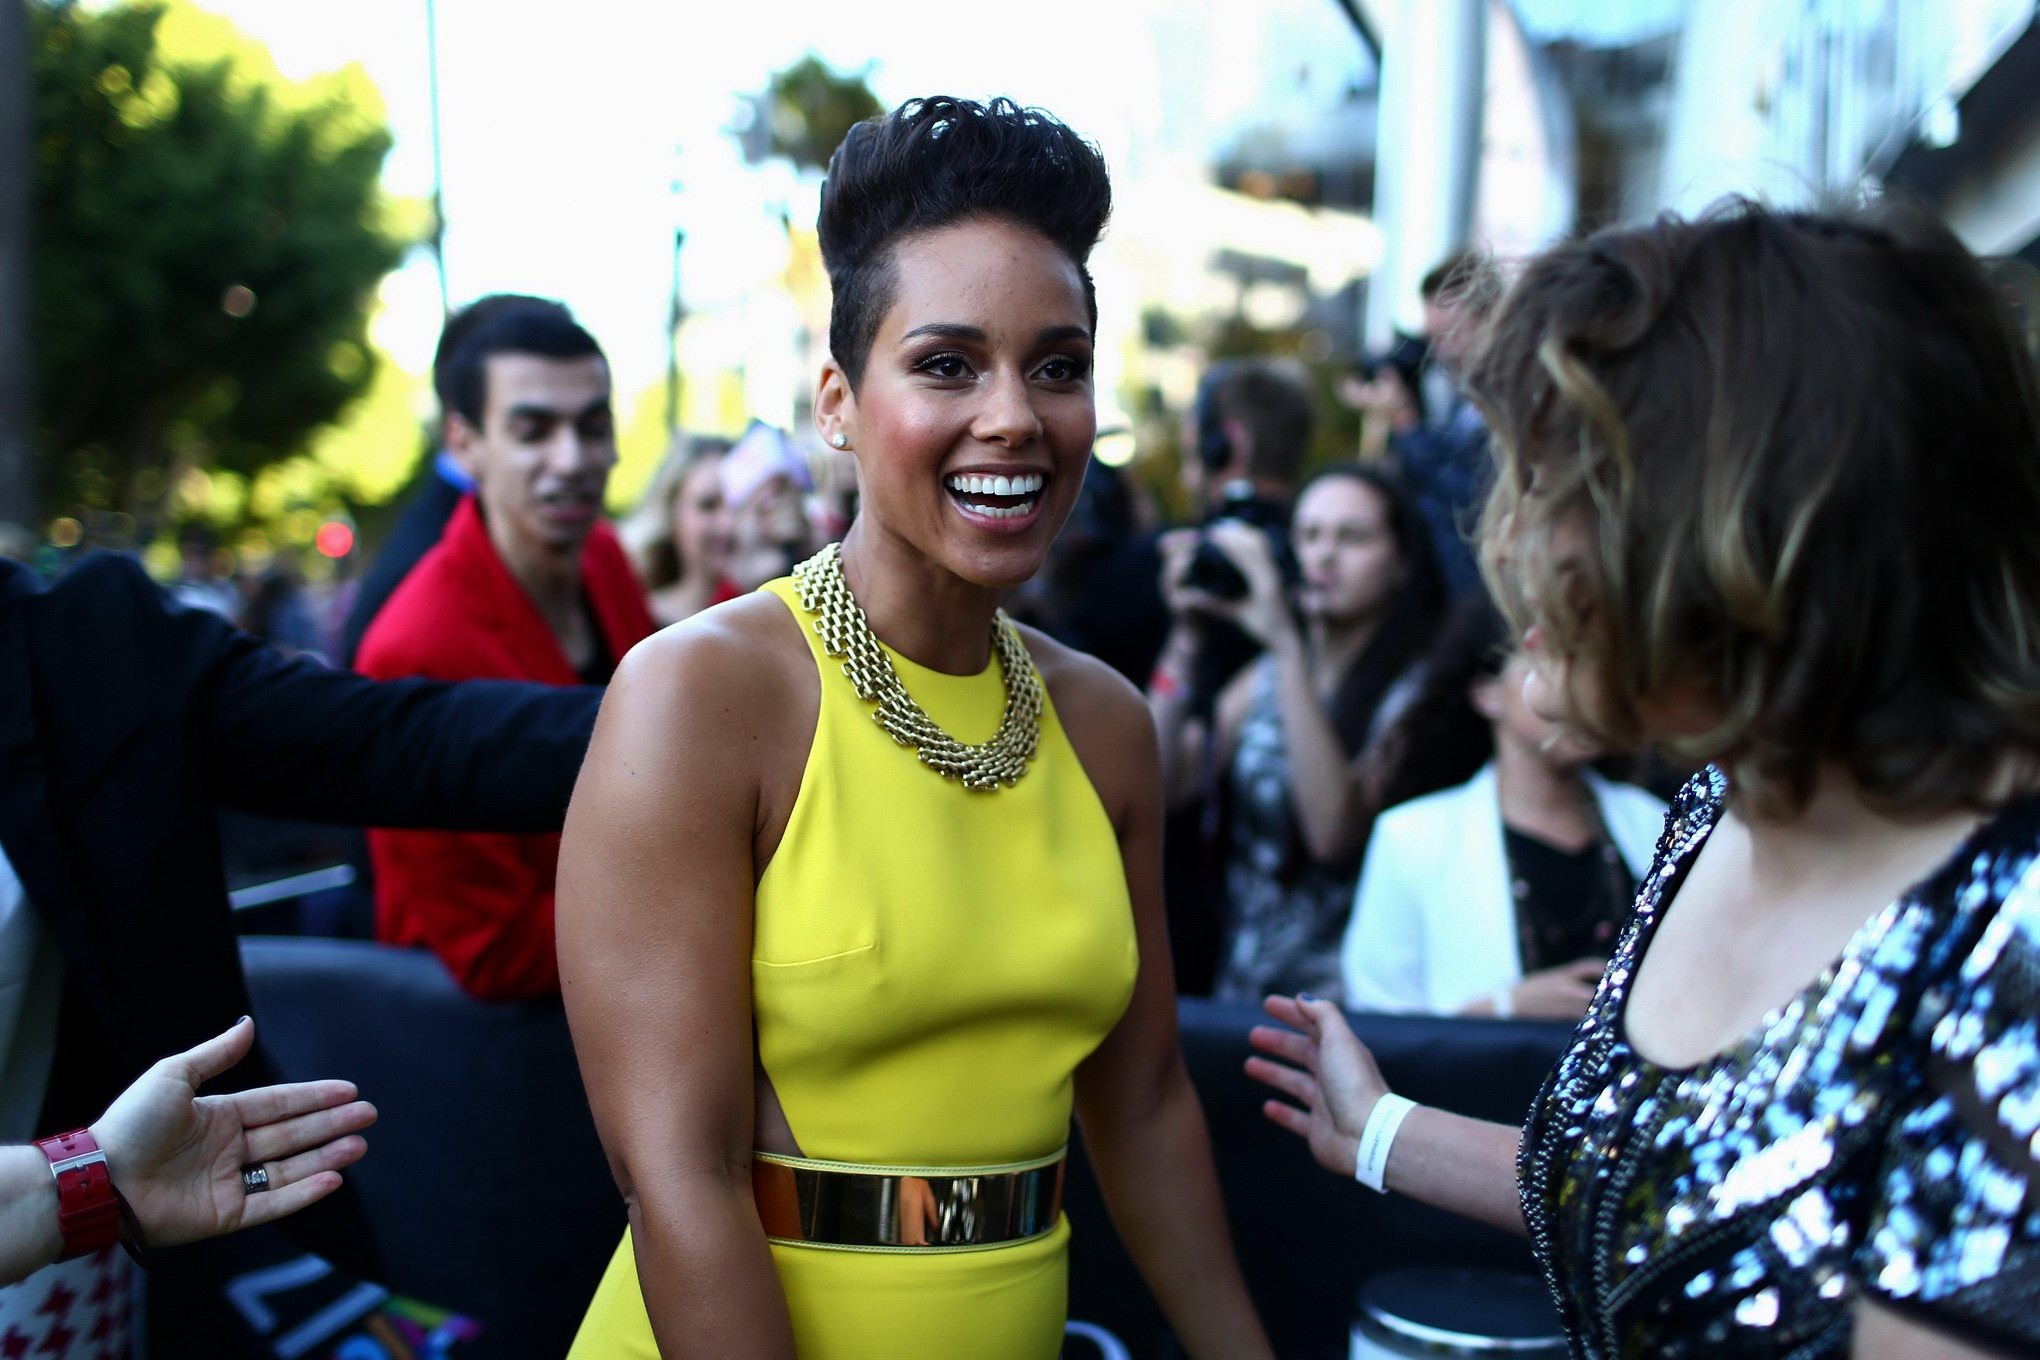 Alicia Keys braless showing pokies  side-boob at the 27th Annual ARIA Awards in  #75211556